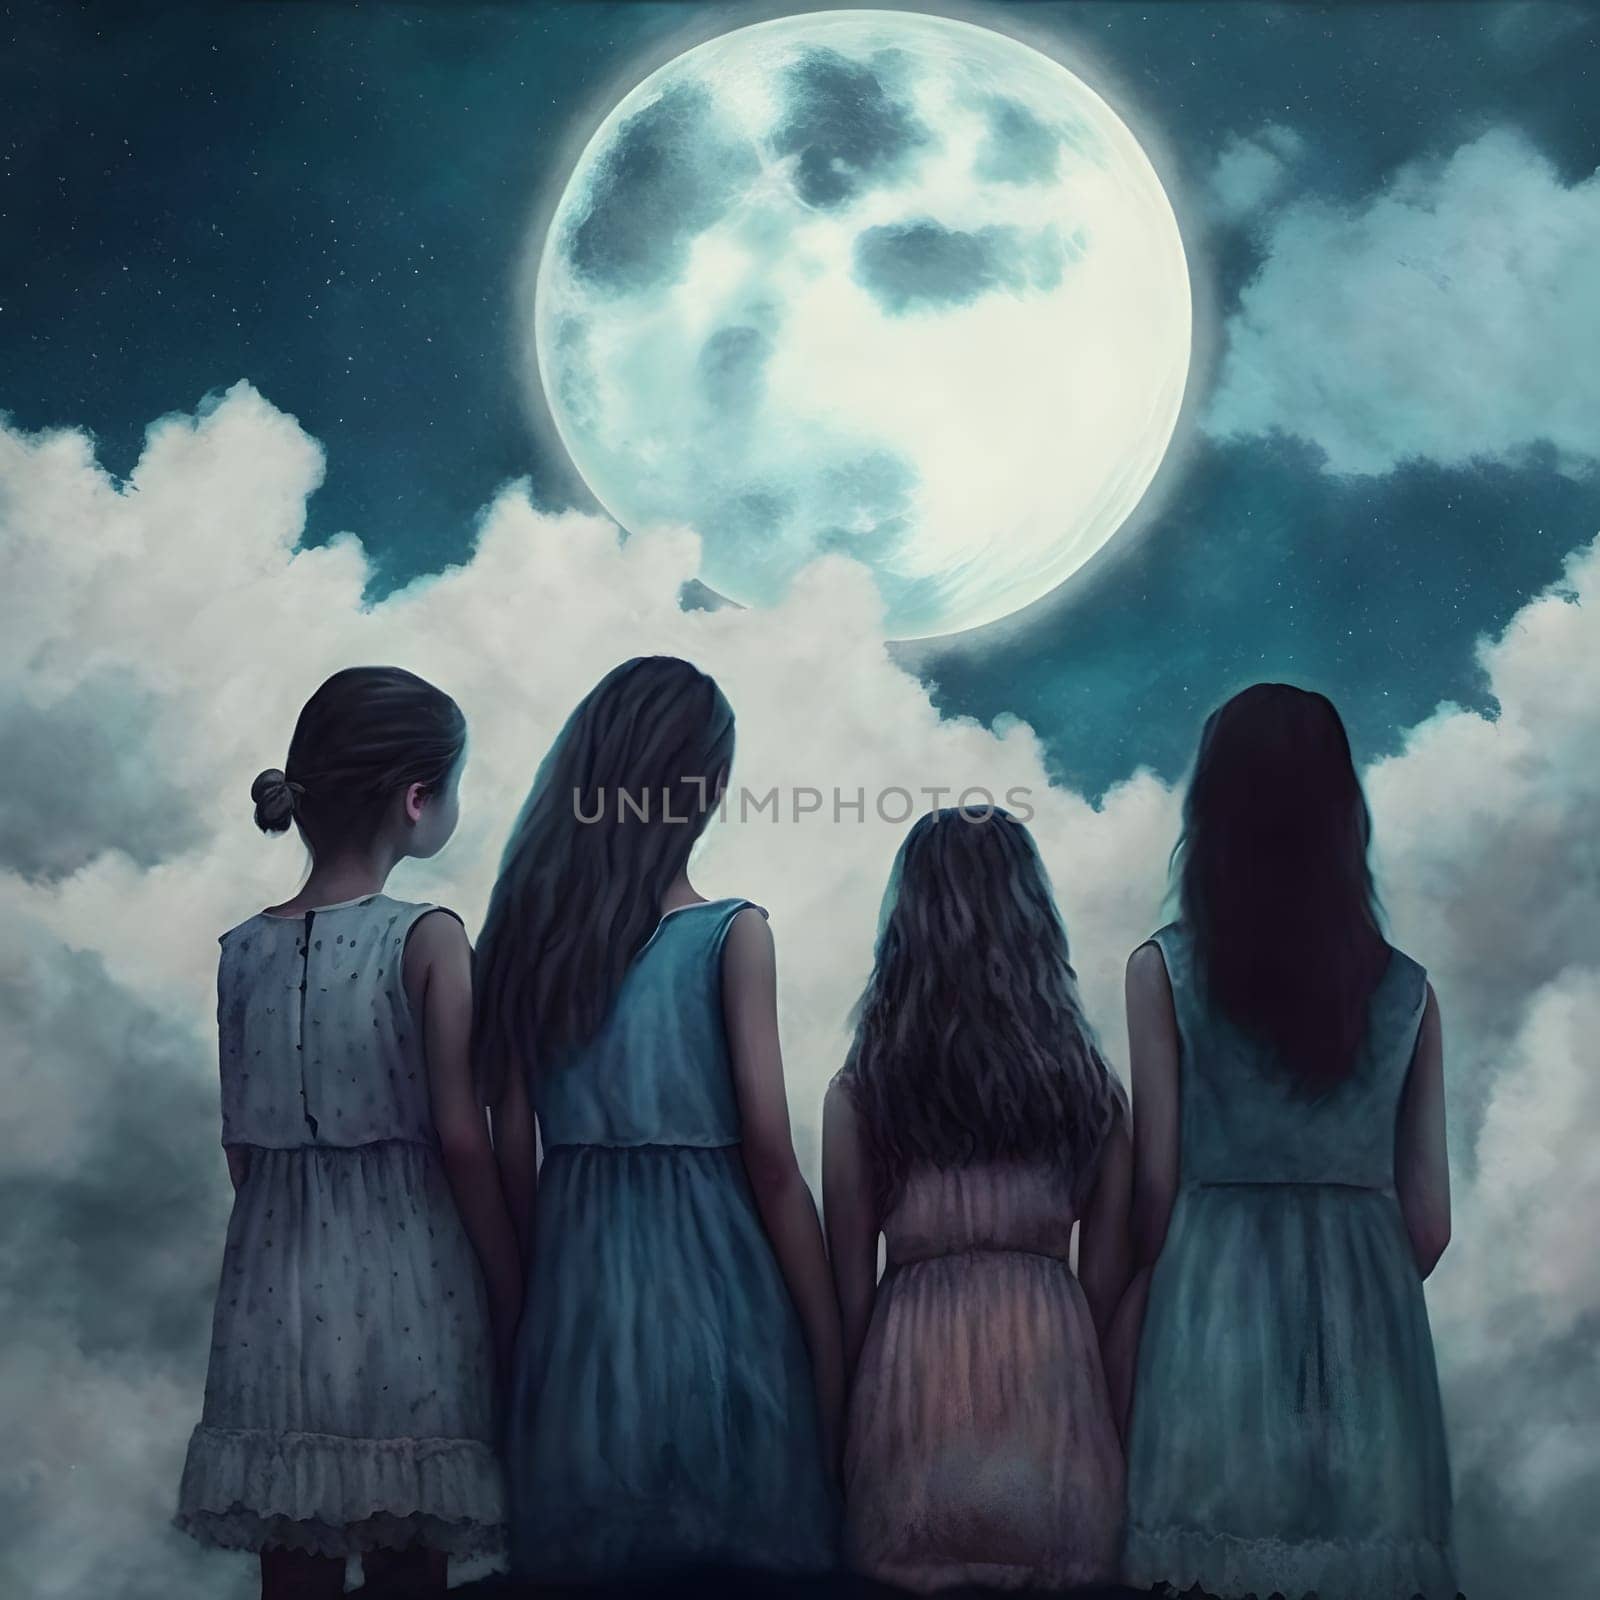 four girls looking up at the Moon in night sky, rear view, neural network generated art. Digitally generated image. Not based on any actual scene or pattern.